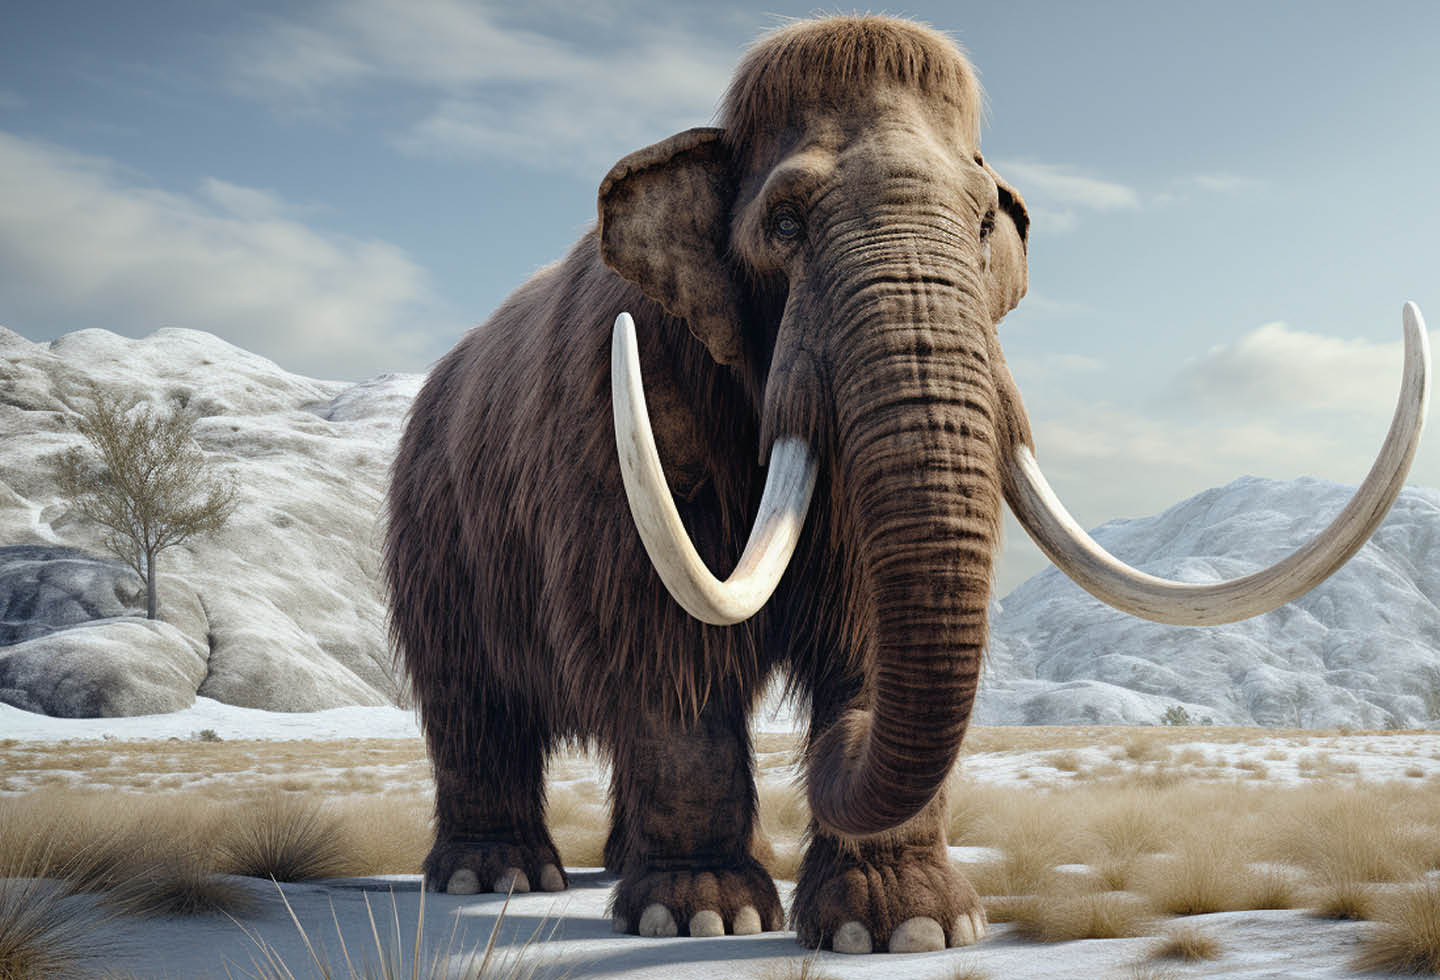 Should We Bring Back the Woolly Mammoth?/The Great Condor Comeback